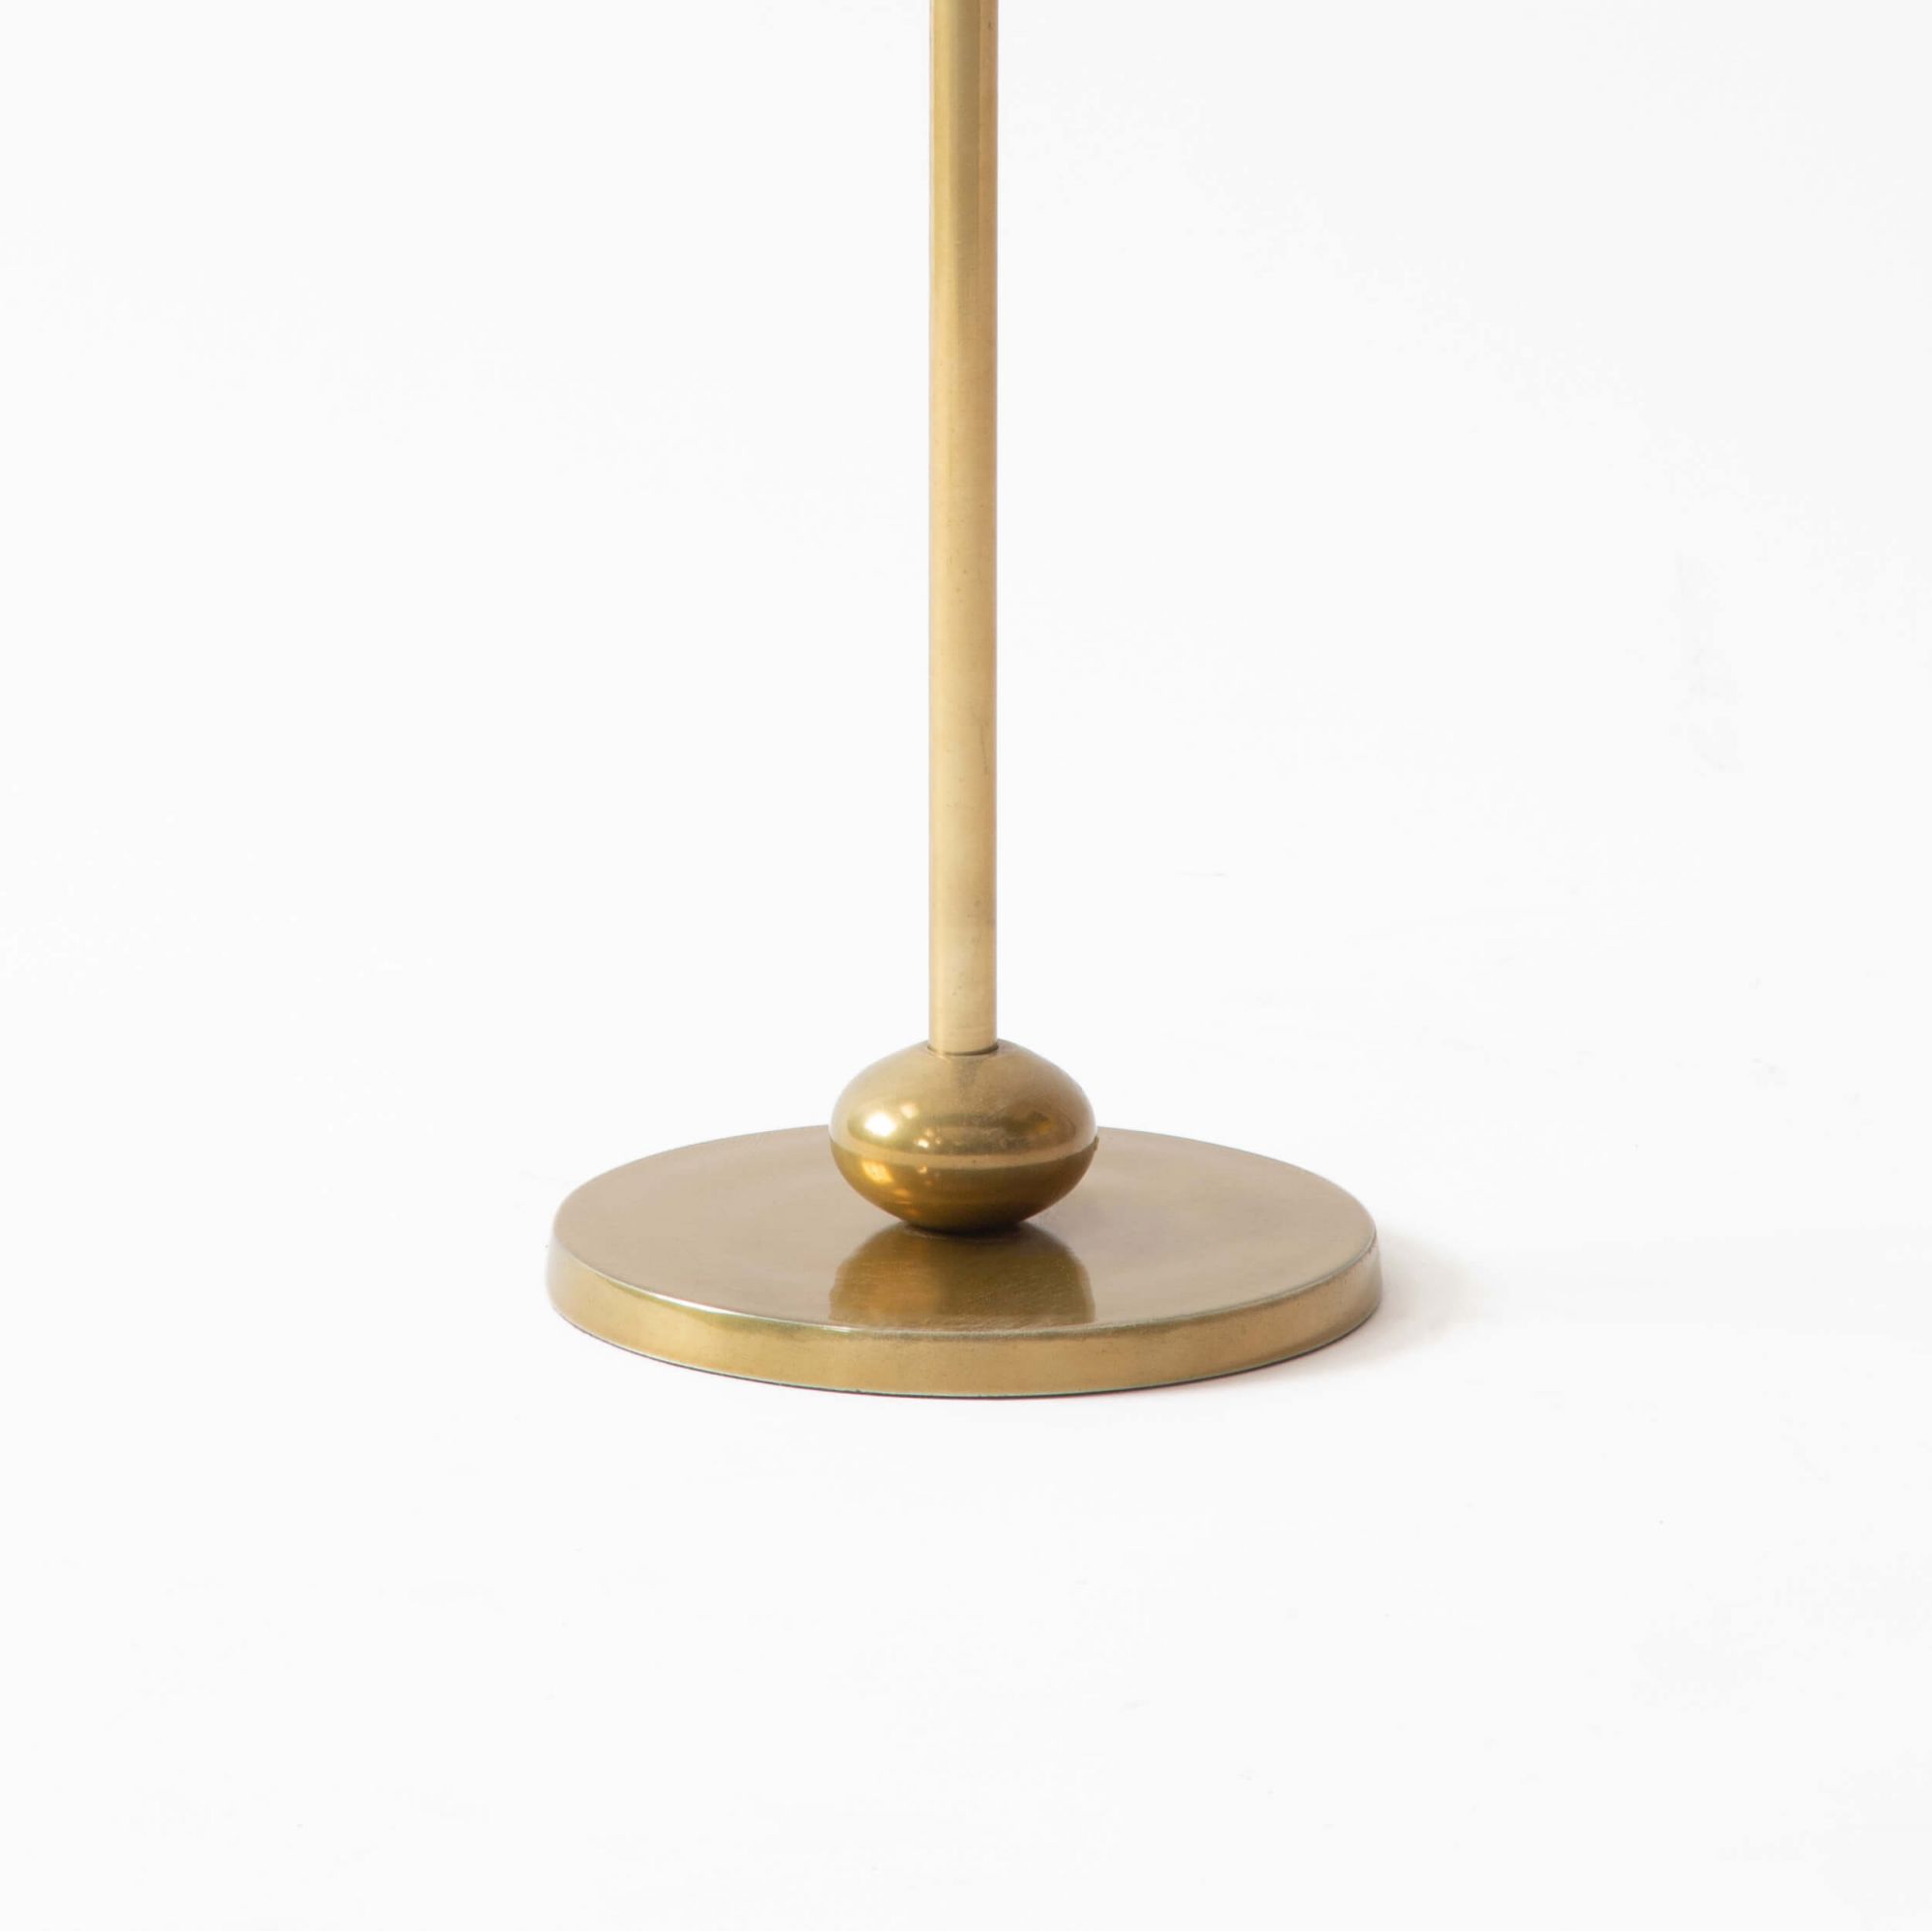 Roma Candle Stand - Antique Brass